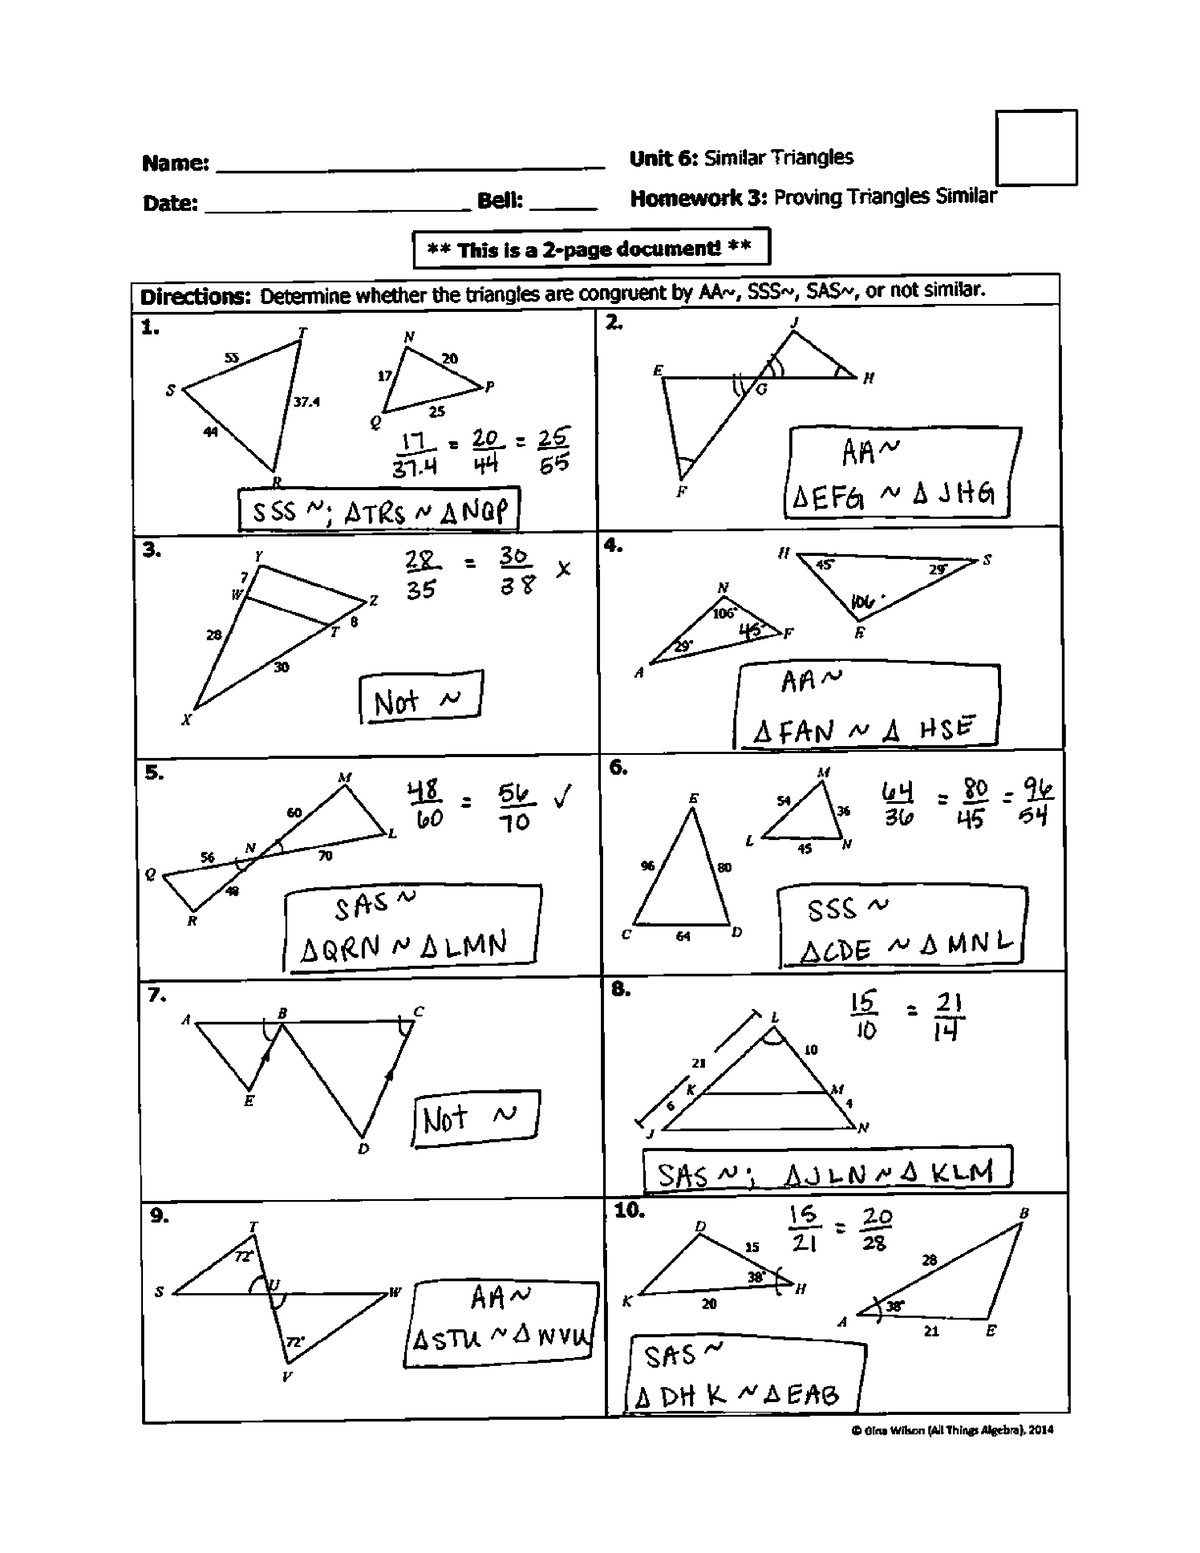 homework 3 proving triangles similar answers